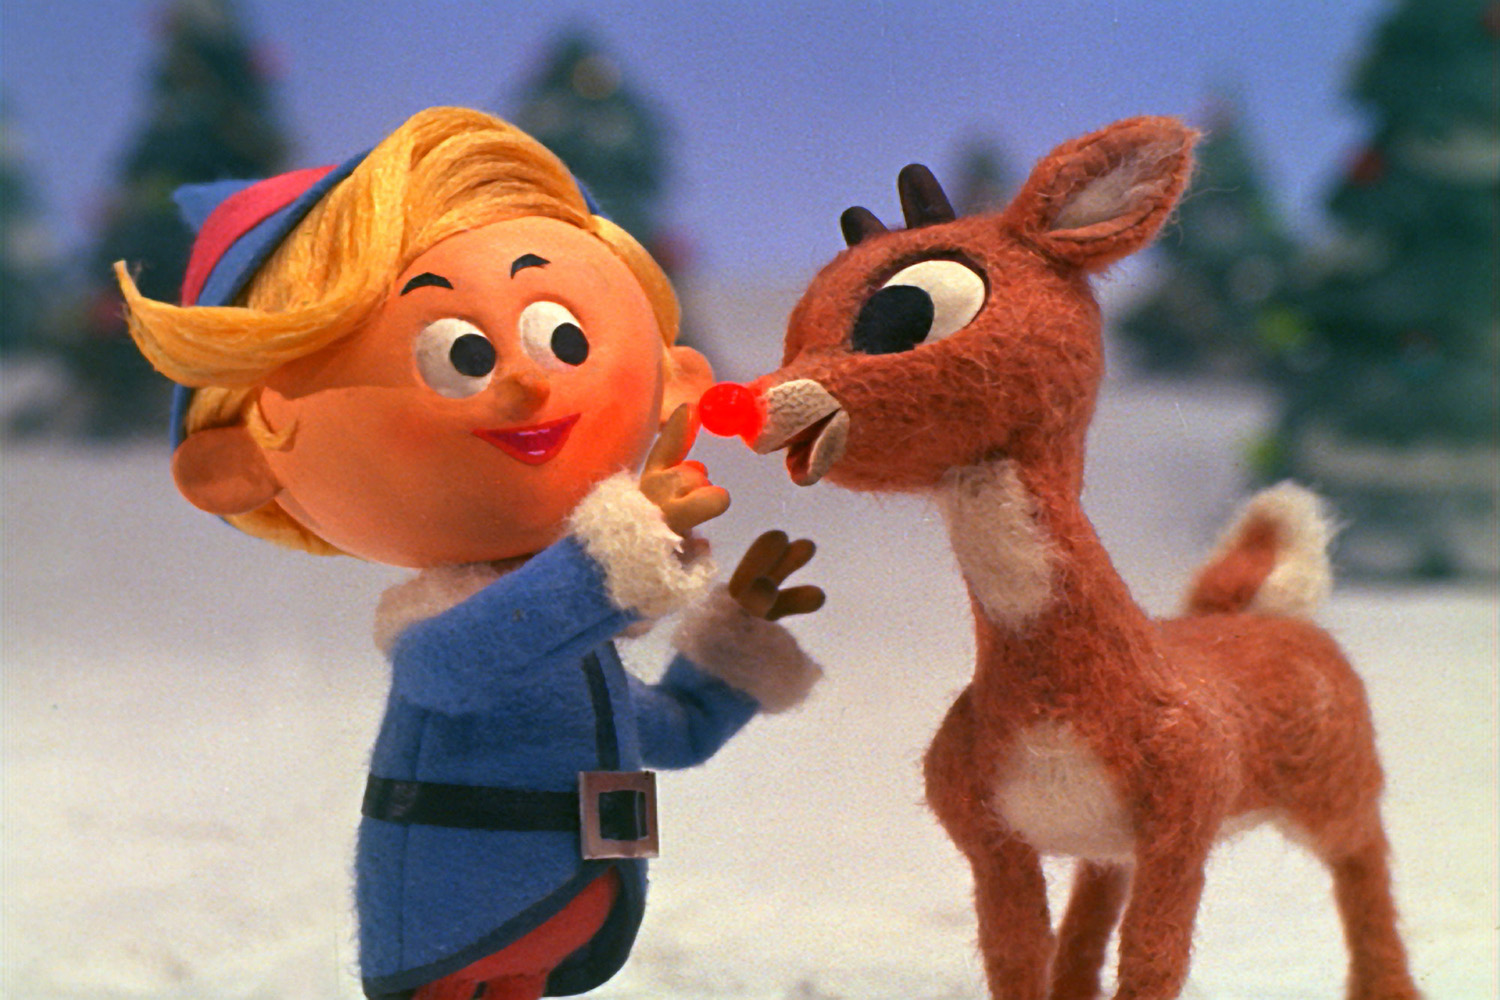 Rudolph With Your Nose So Bright, Won’t You Guide Us Through Our Crucibles Tonight?